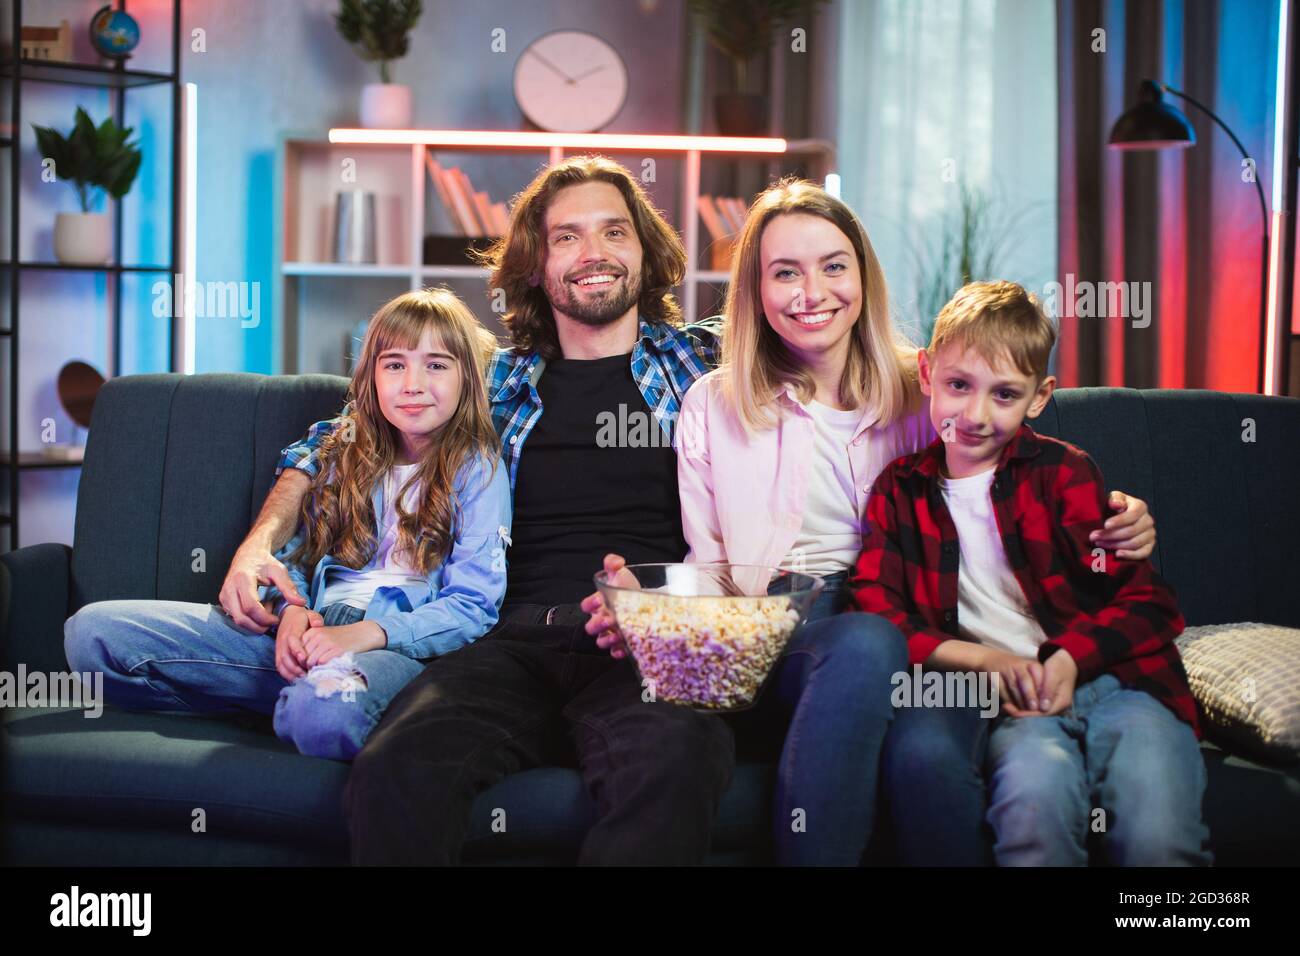 Happy caucasian family of four sitting together on couch enjoying movie with popcorn. Young parents with two kids watching TV during evening time at home. Stock Photo